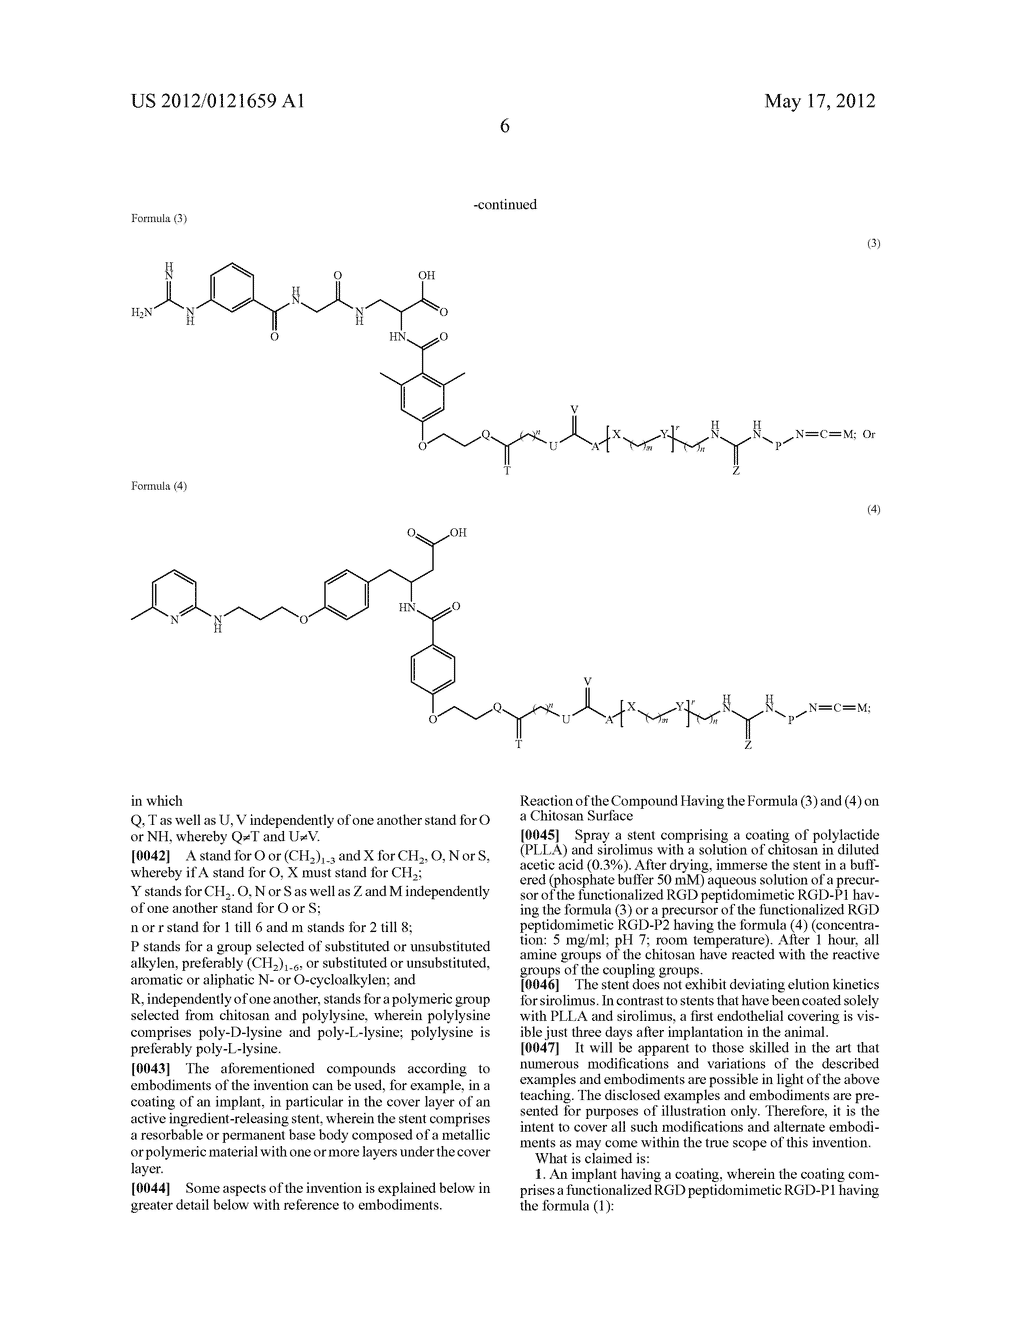 FUNCTIONALIZED RGD PEPTIDOMIMETICS AND THEIR MANUFACTURE, AND IMPLANT     HAVING A COATING CONTAINING SUCH FUNCTIONALIZED RGD PEPTIDOMIMETICS - diagram, schematic, and image 07